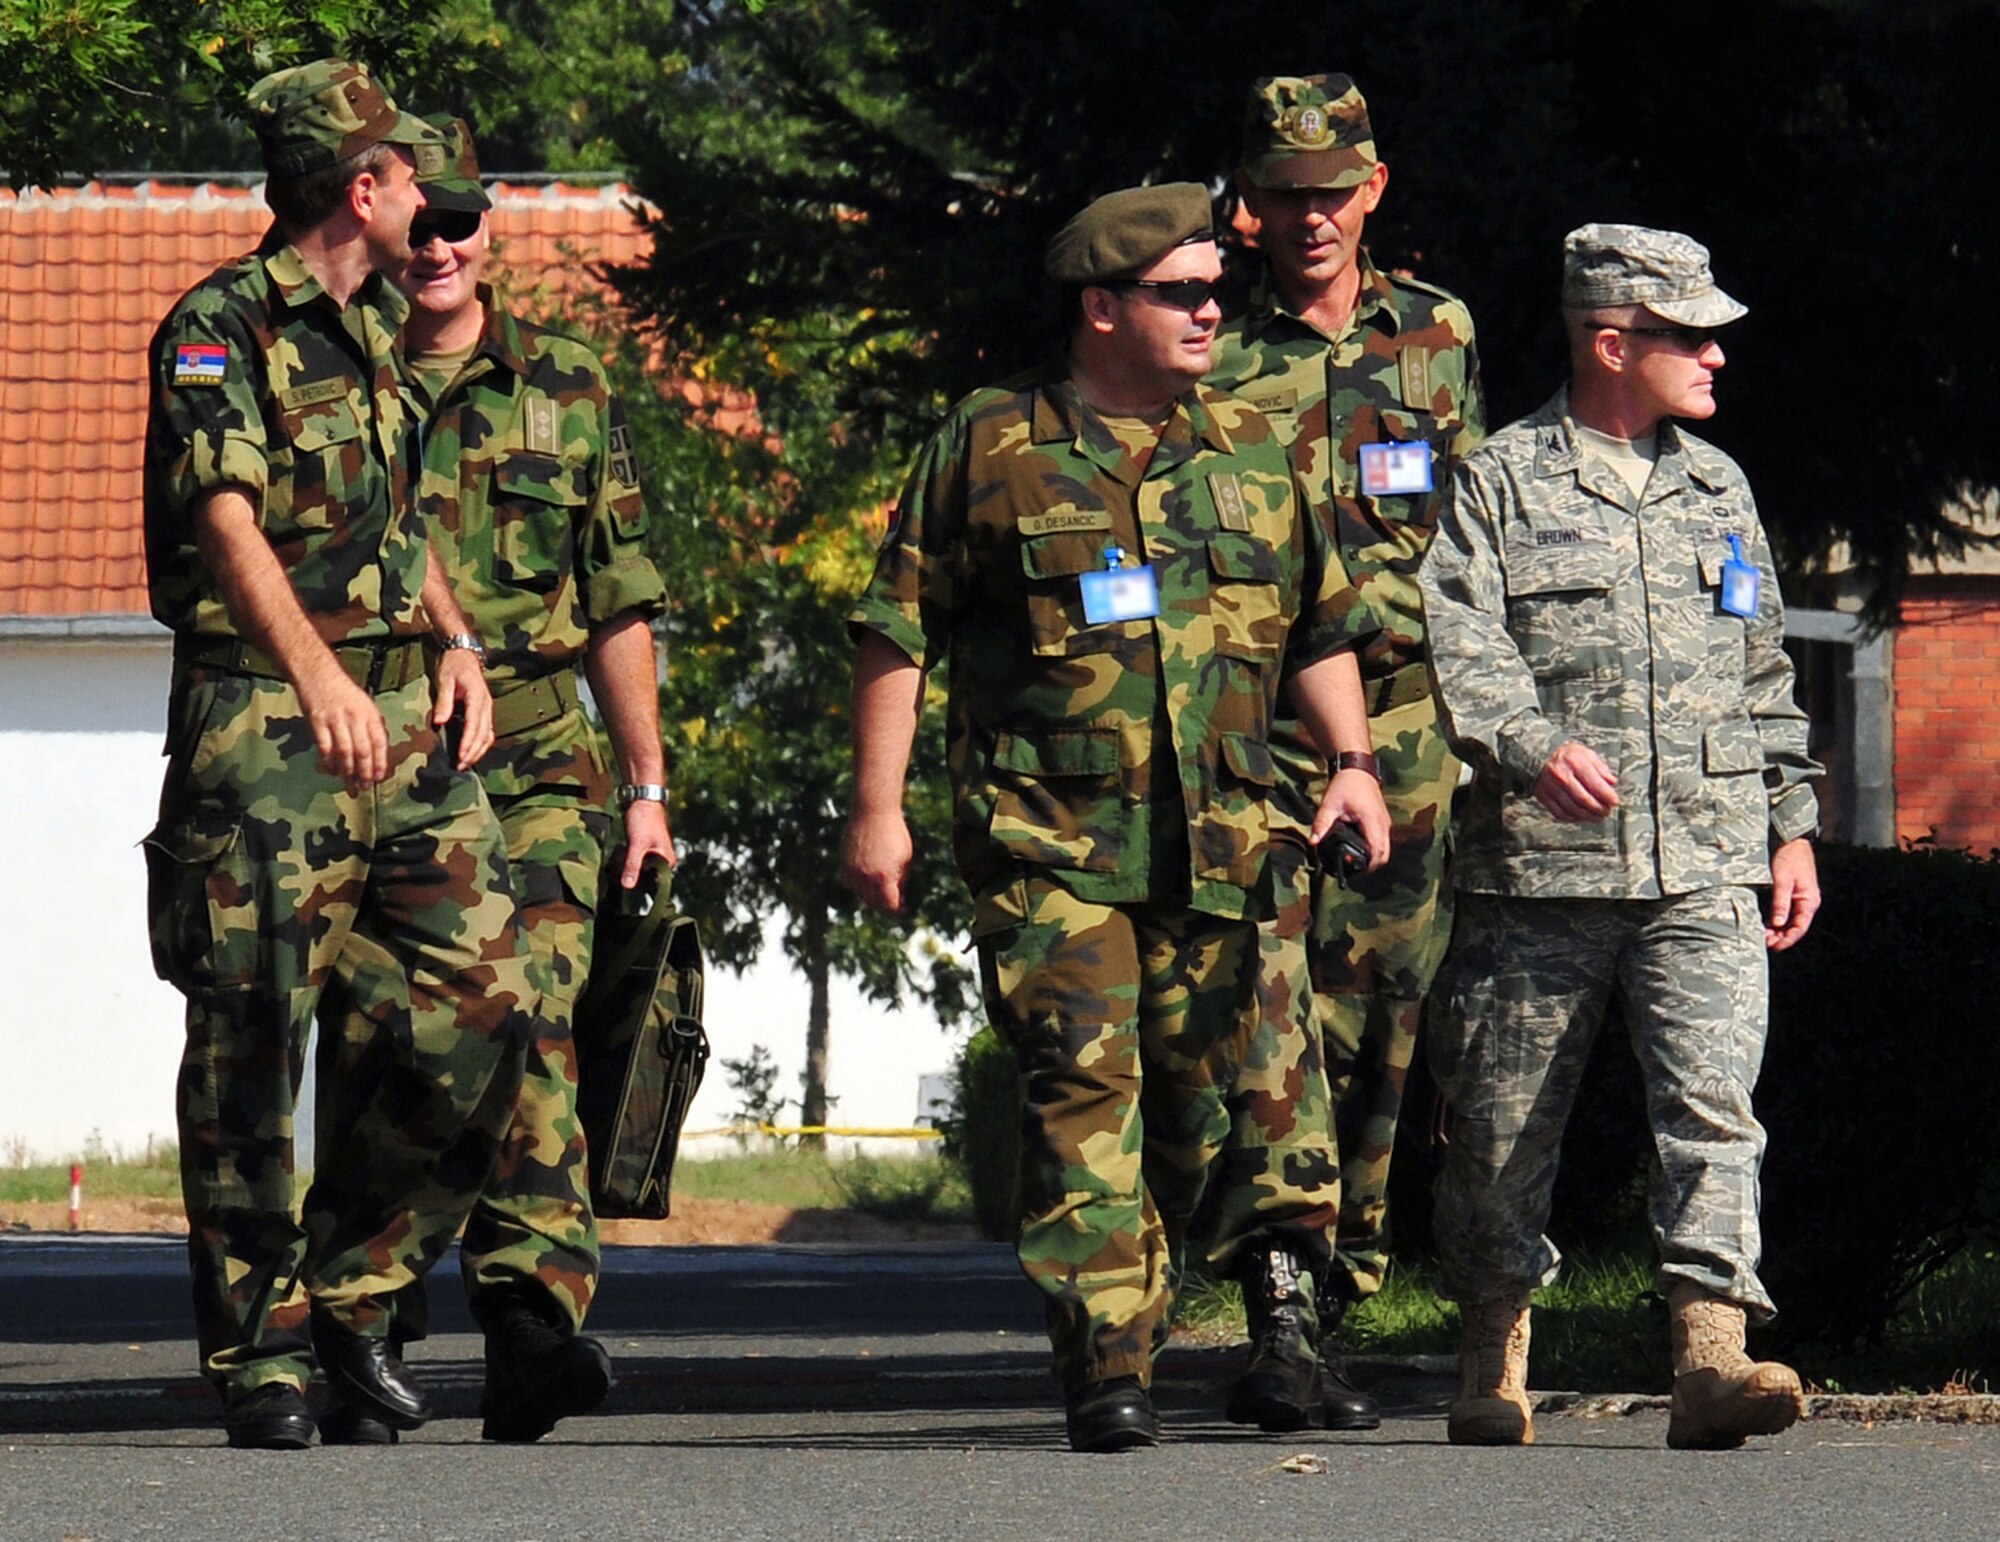 U.S. Air Force Col. Tim Brown (right), 435th Expeditionary Air Ground Operations Group commander, receives a tour of the Knez Mihailo Barracks grounds in Nis, Serbia, from a group of Serbian Armed Forces officers Aug. 29, 2009.  Colonel Brown, along with 31 fellow 435th Air Ground Operations Wing members, deployed to Serbia for two weeks in support of the Medical Training Exercise in Central and Eastern Europe 2009, better known as MEDCEUR 2009. (U.S. Air Force photo by Staff Sgt. Markus M. Maier)
